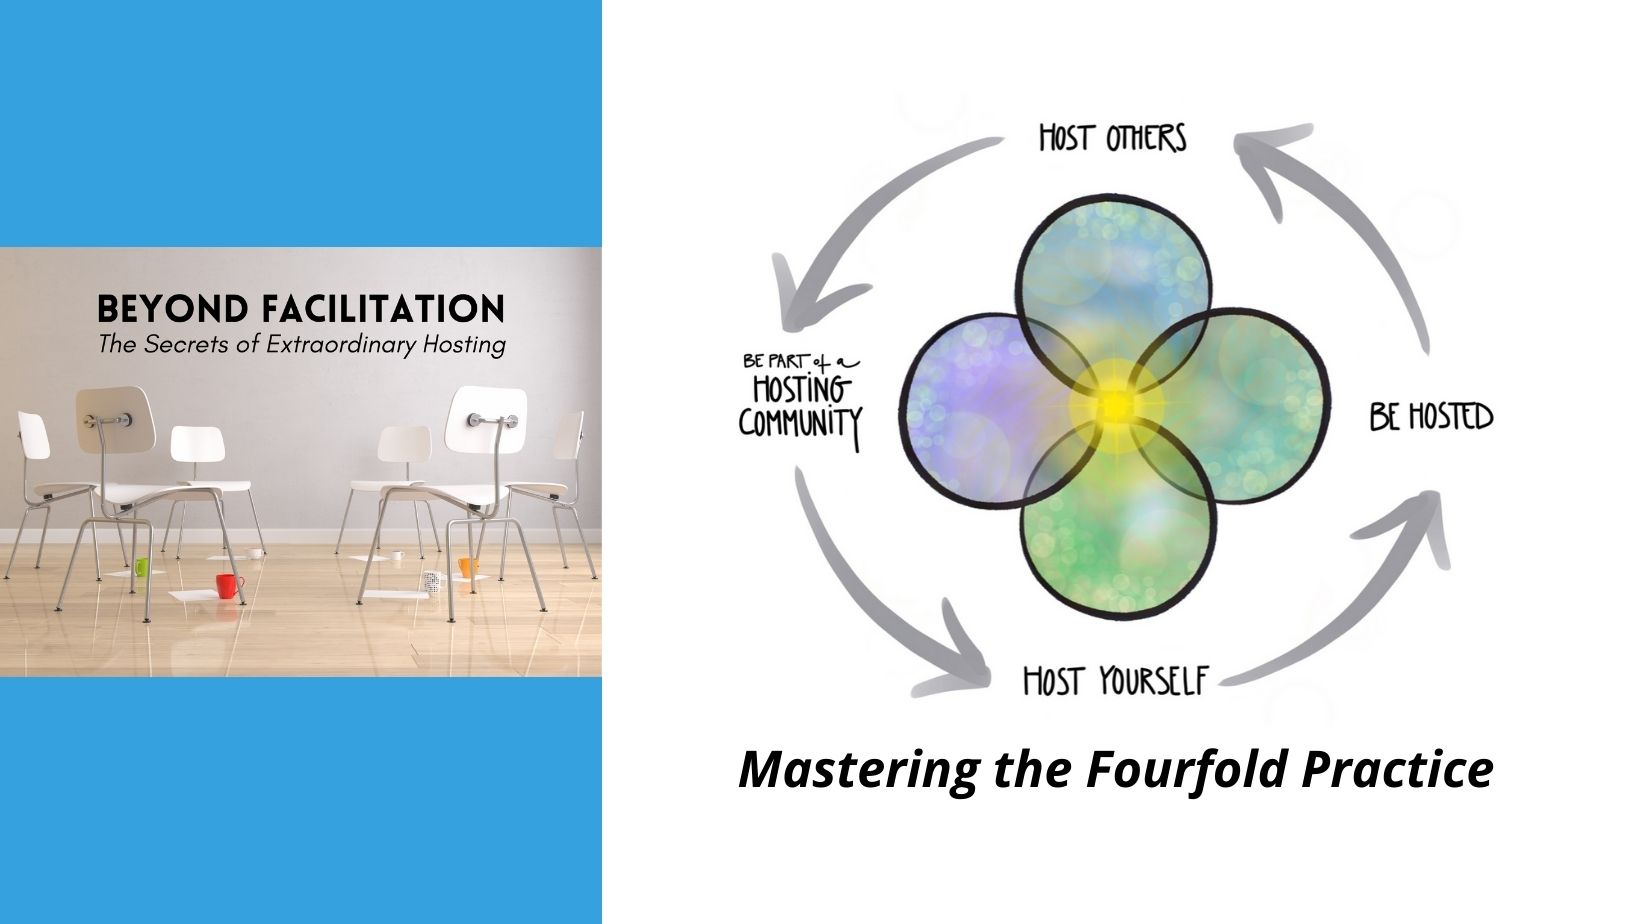 BEYOND FACILITATION: Mastering the Fourfold Practice